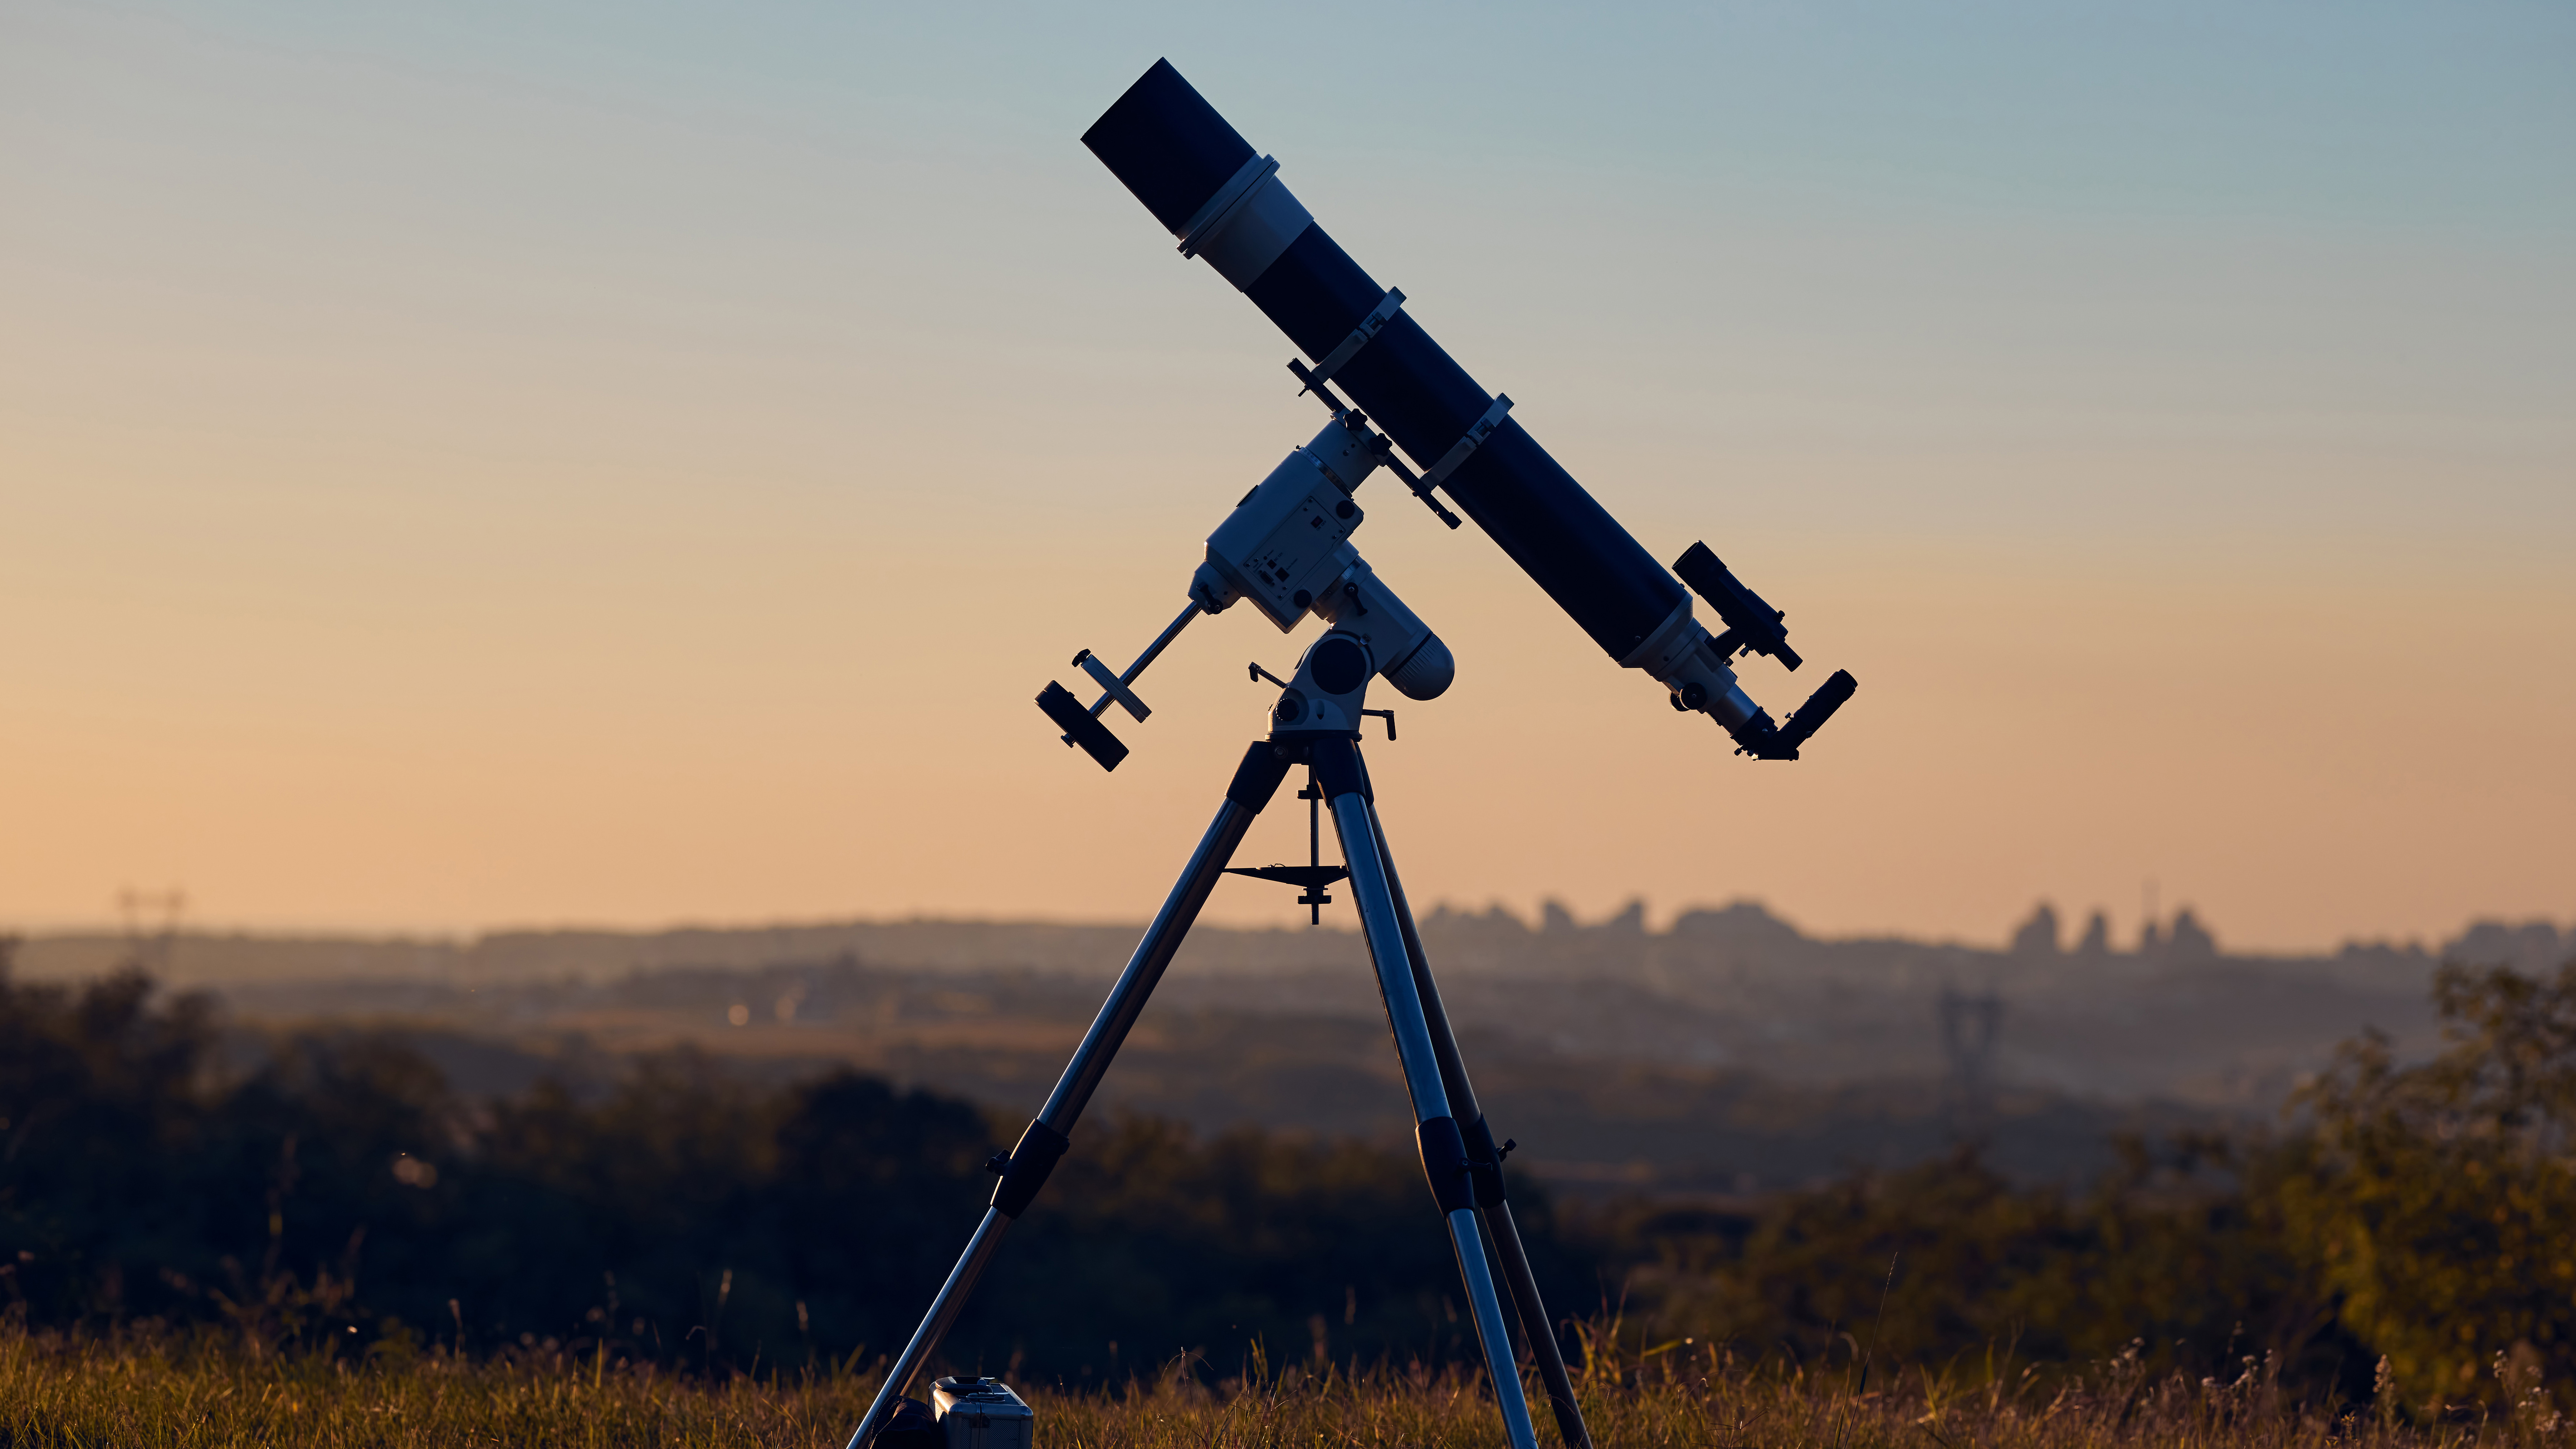 Telescopes at Best Buy: Image shows telescope against countryside backdrop